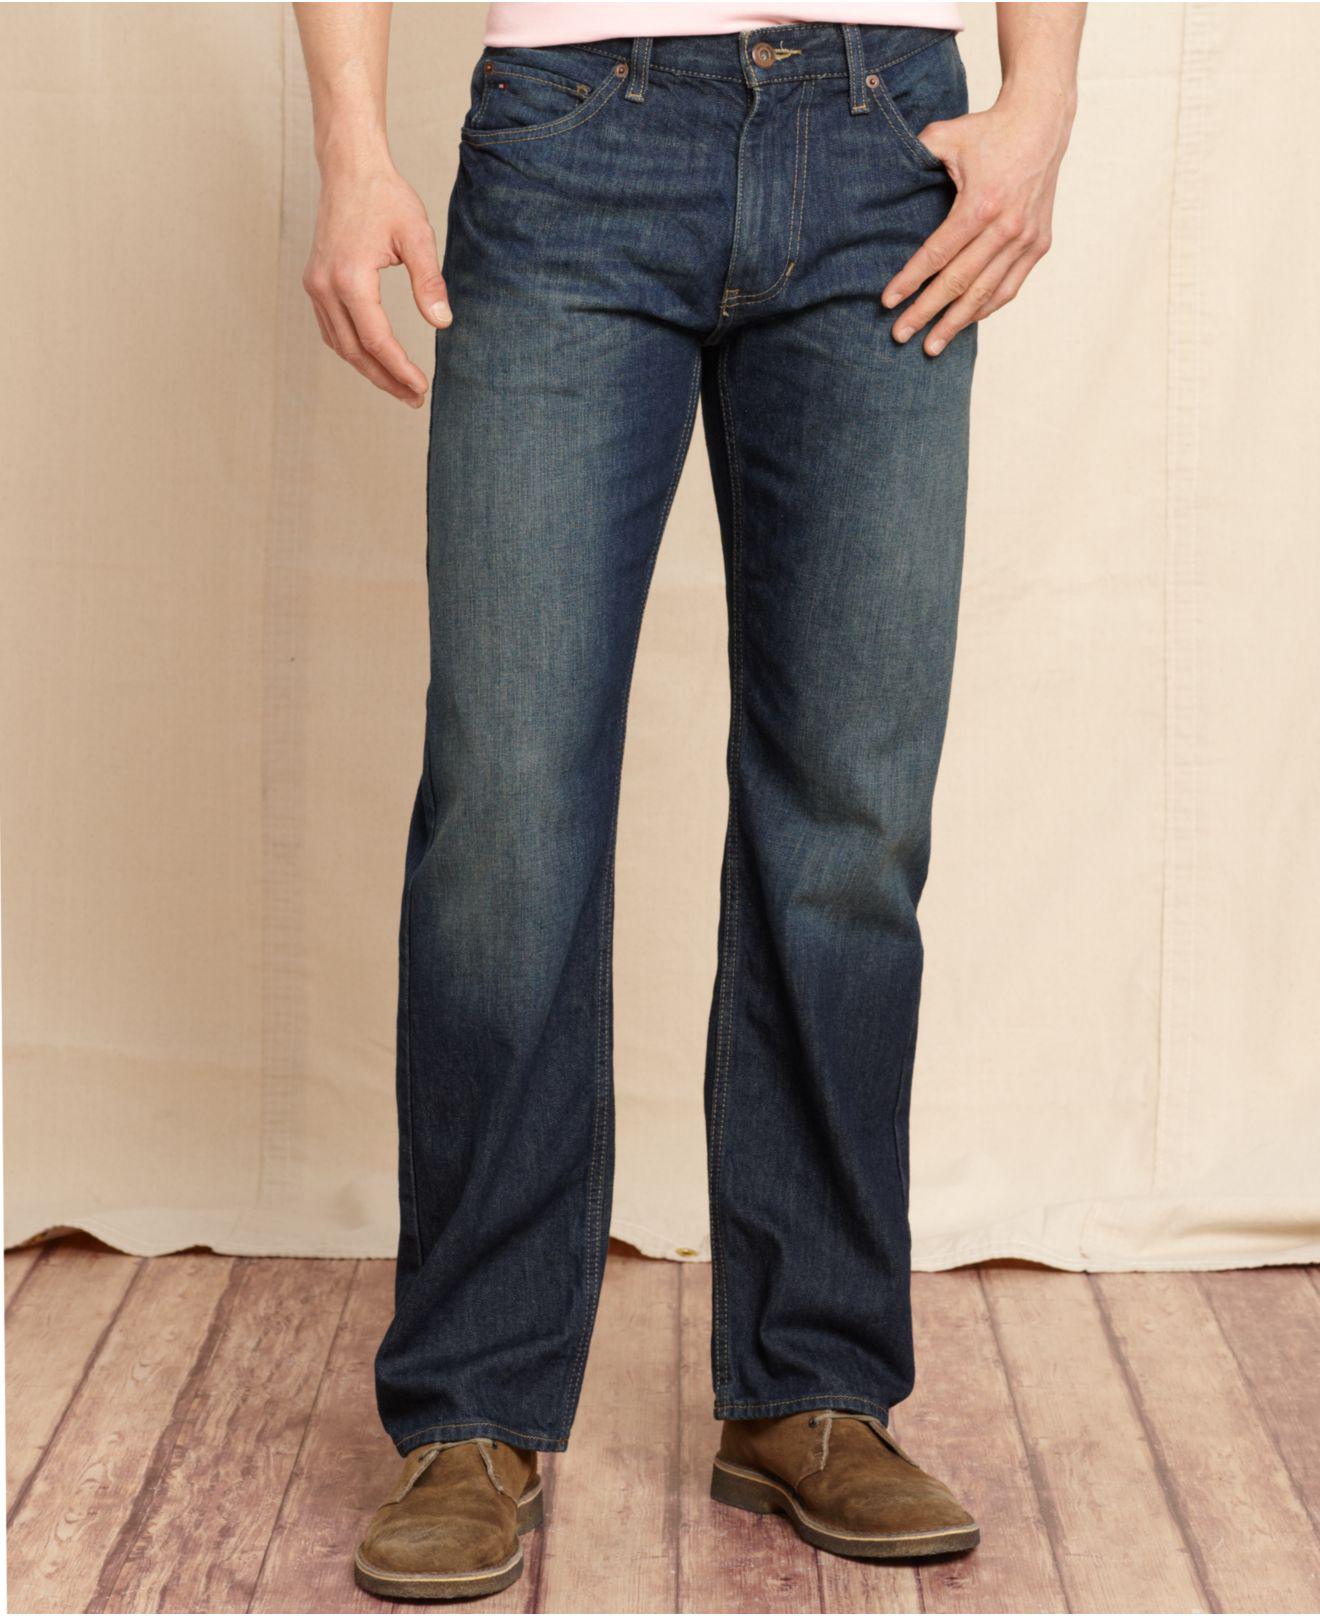 Lyst - Tommy Hilfiger Jeans, Campus Freedom Relax Fit ...